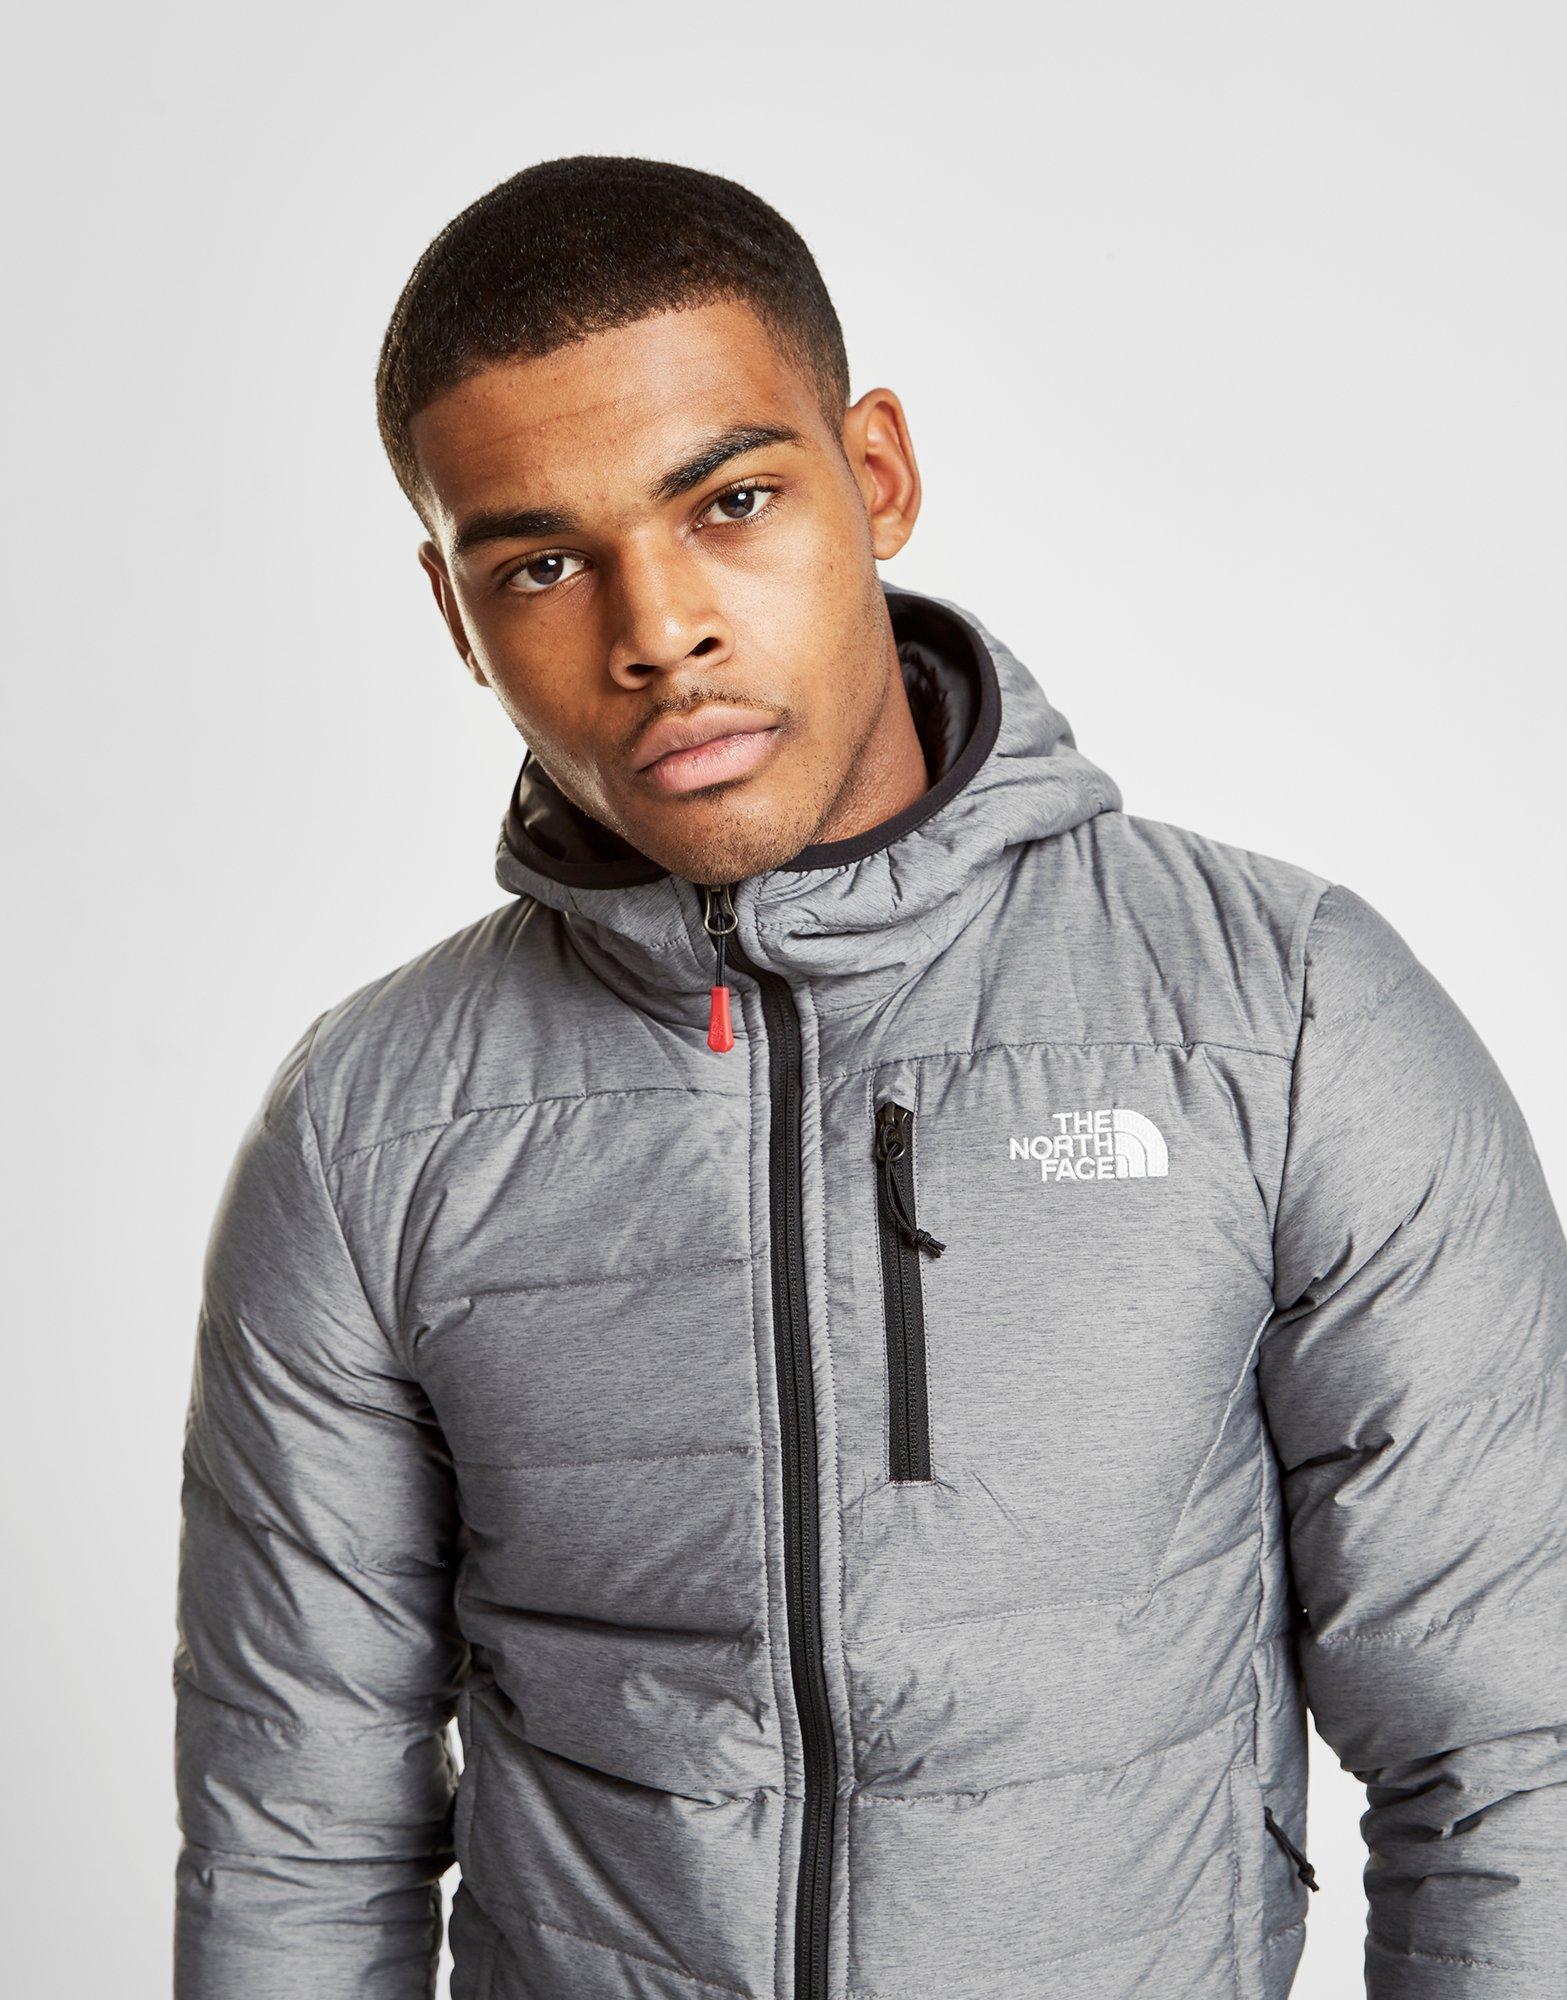 north face jd jacket Cheaper Than Retail Price> Buy Clothing, Accessories  and lifestyle products for women & men -